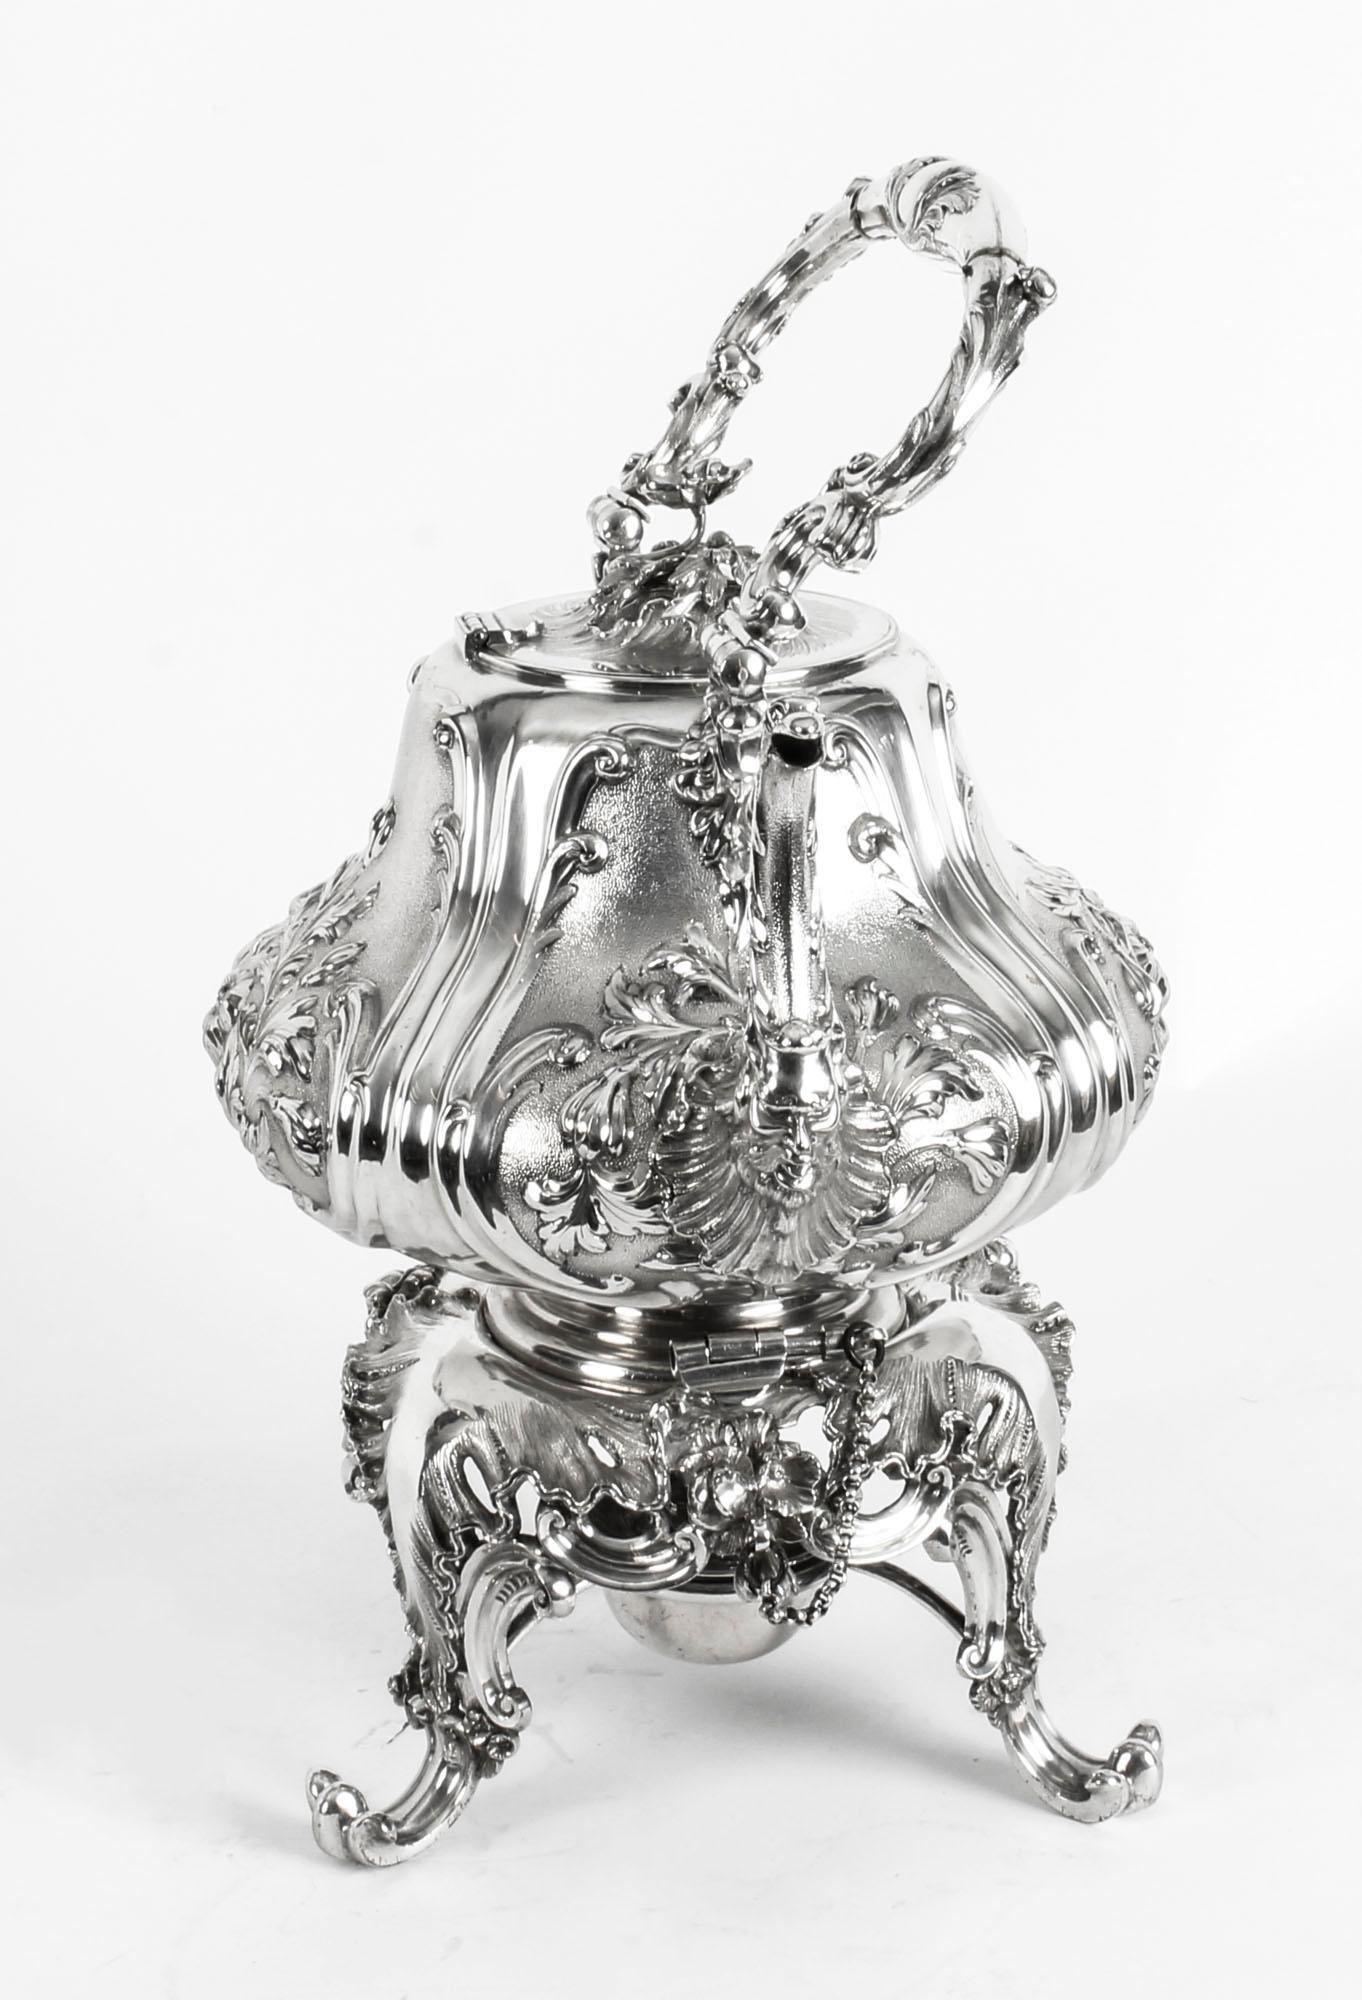 Mid-19th Century Antique Silver Plate Spirit Kettle on Stand by Elkington, 19th Century